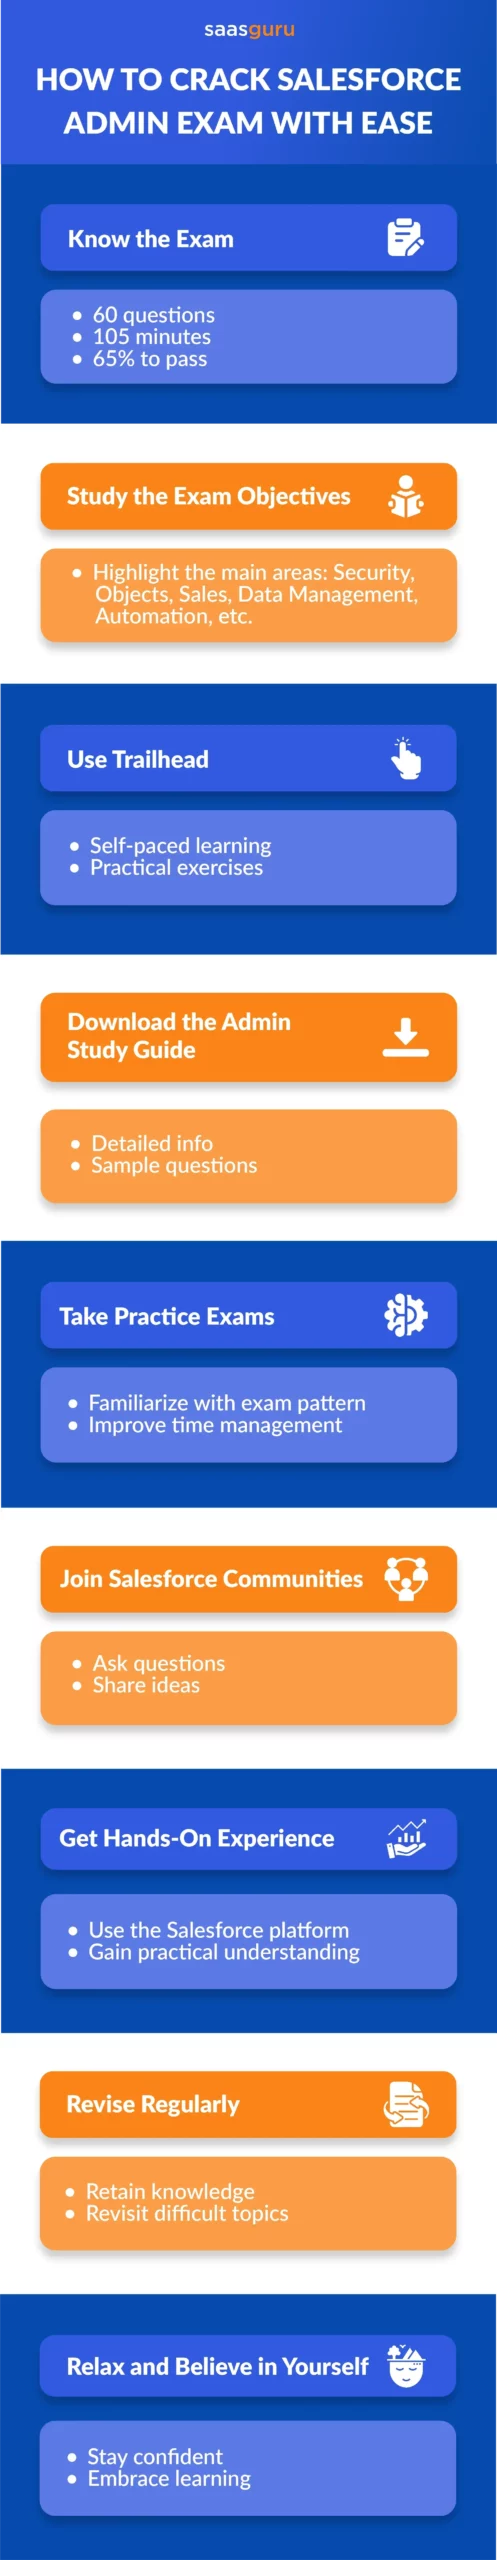 How to crack salesforce admin exam with ease